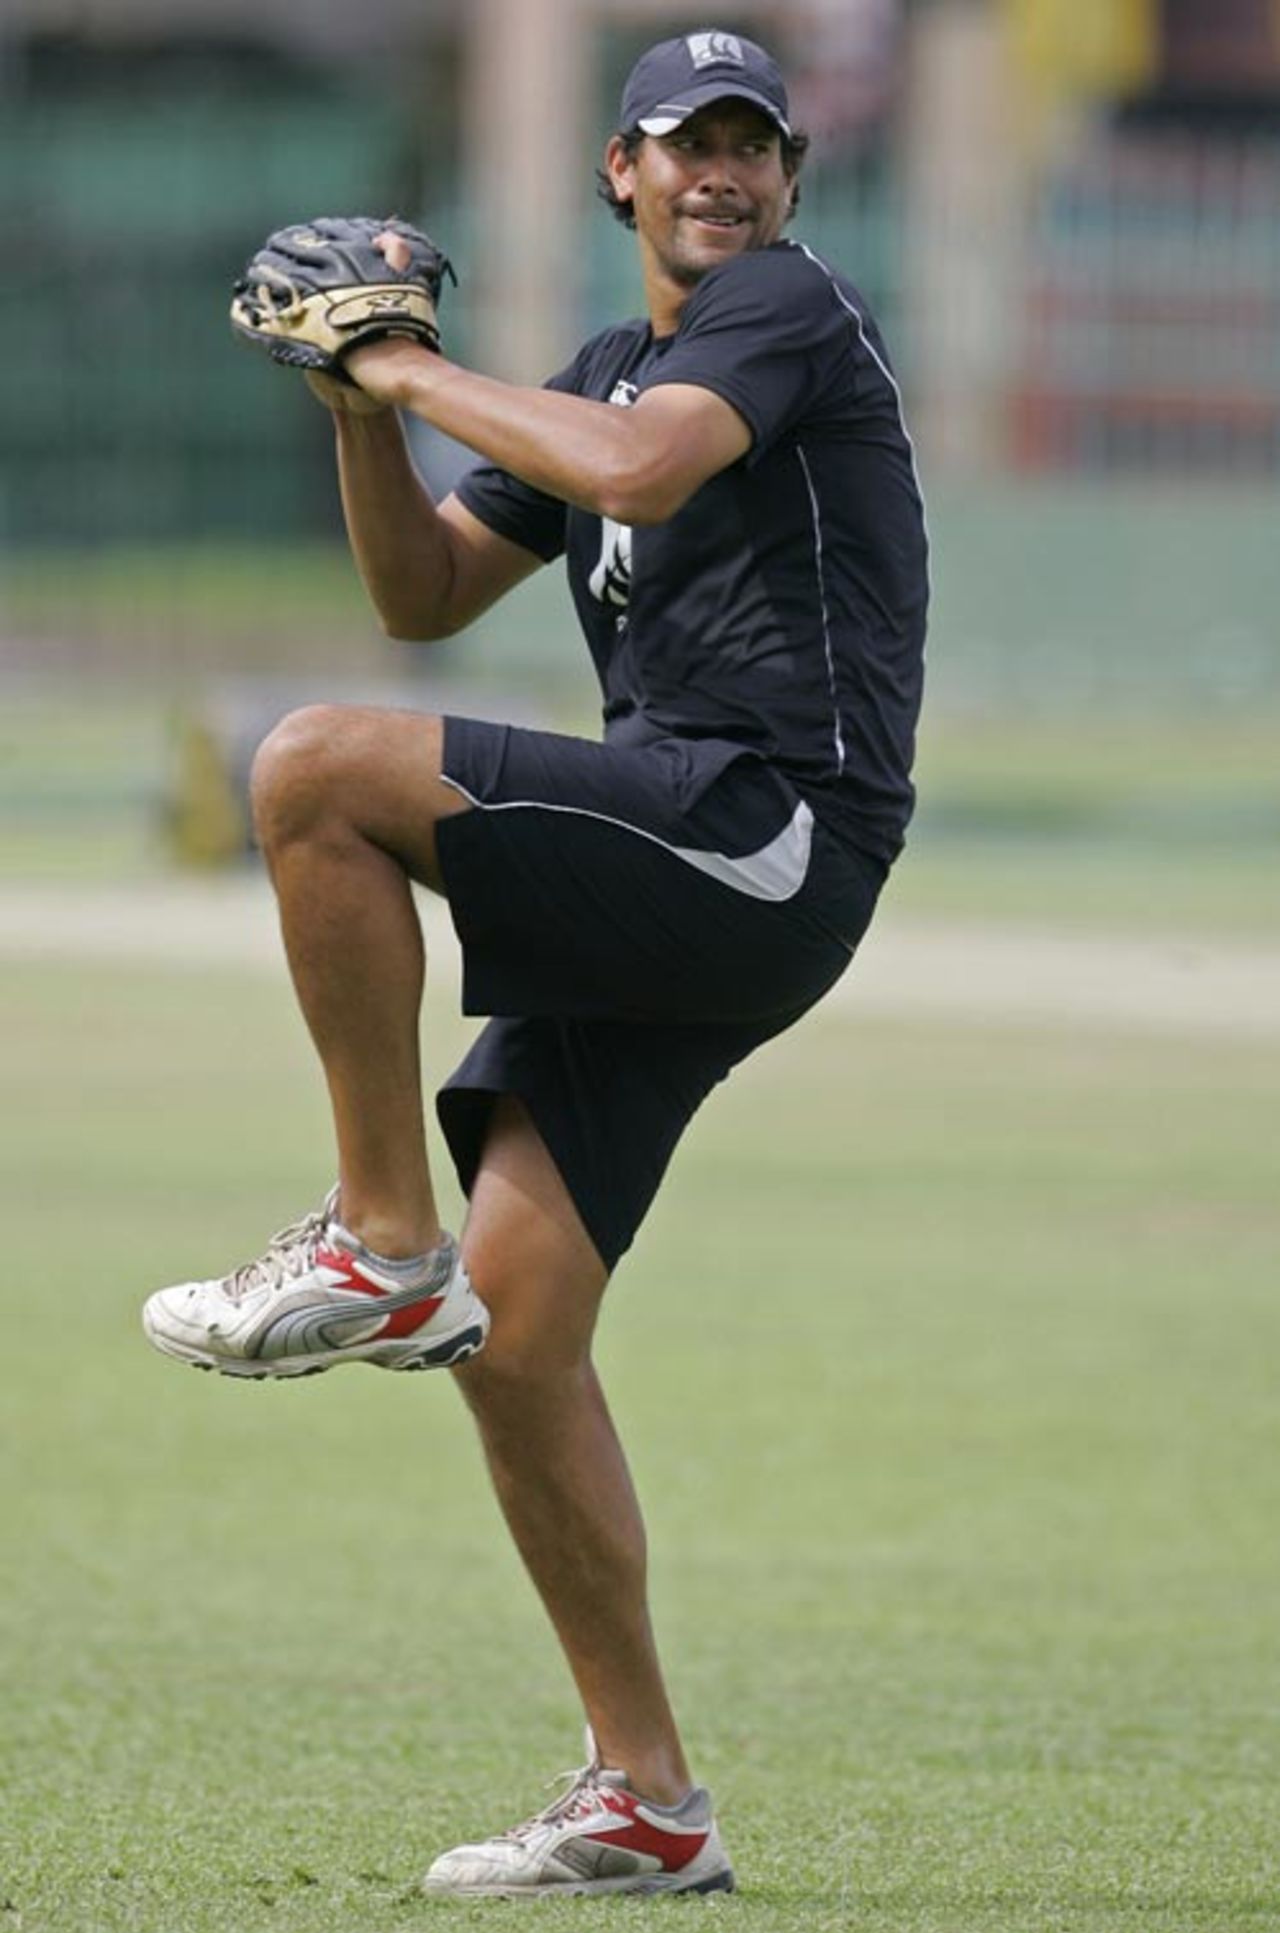 Daryl Tuffey prepares to throw a baseball during a training session, Colombo, September 7, 2009